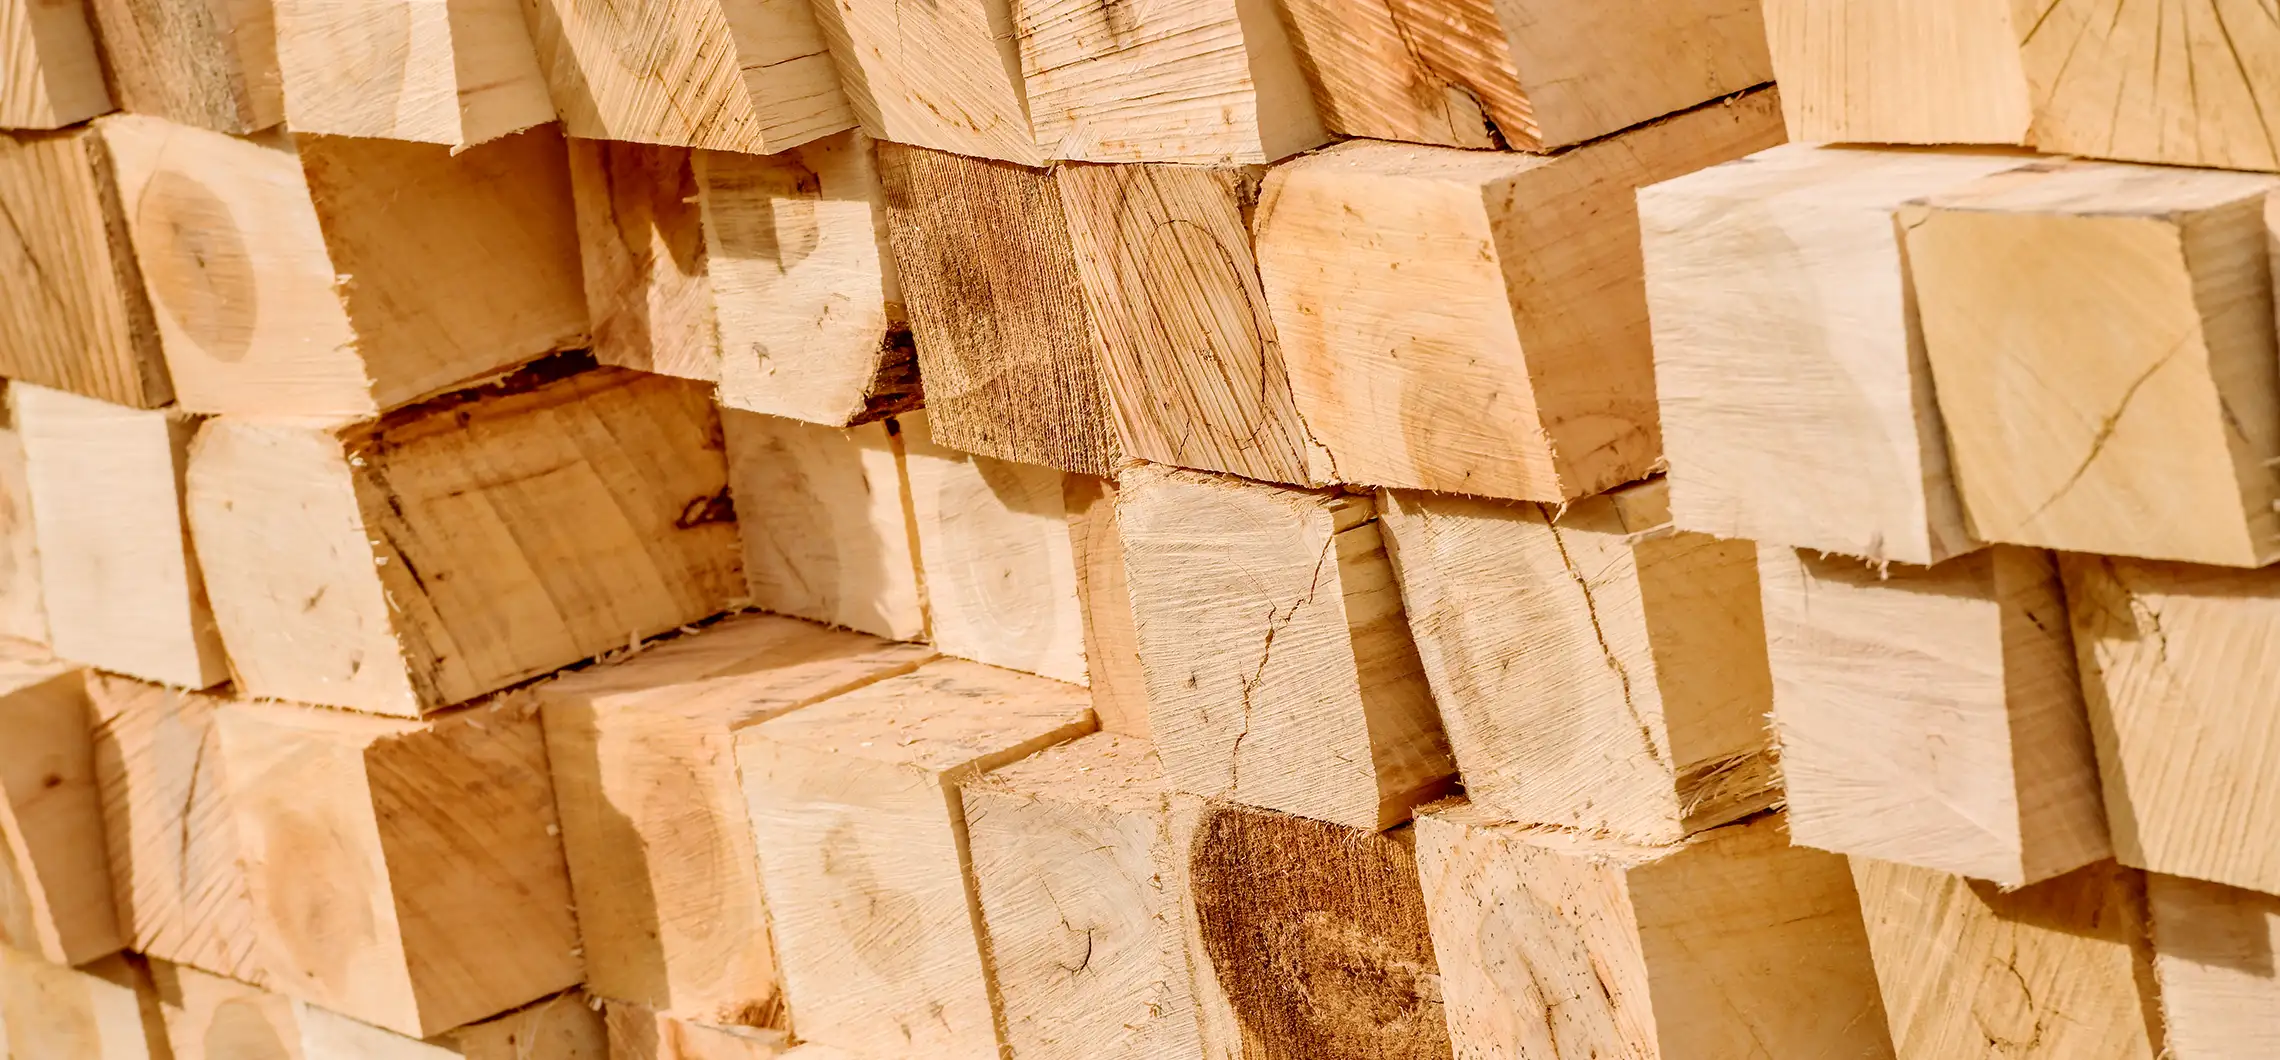 NHLA Members produce a wide array of hardwood products